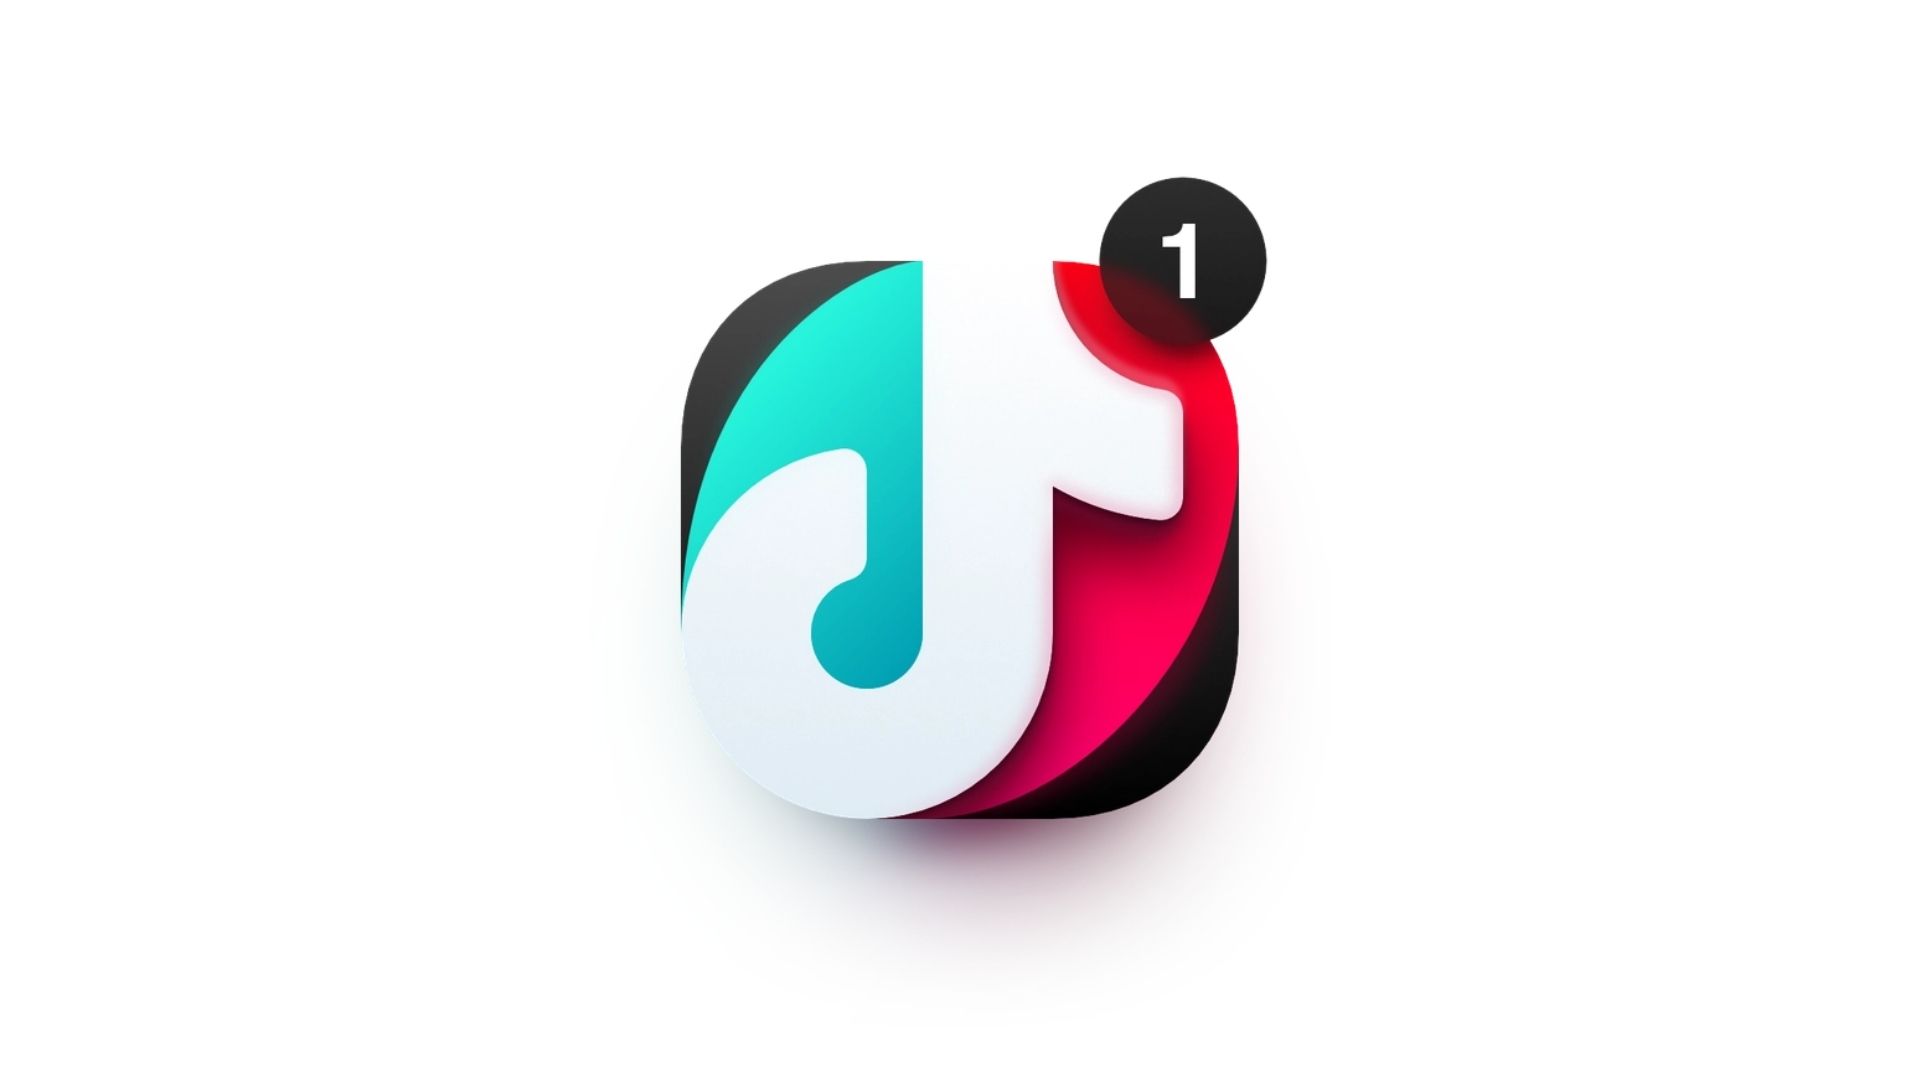 TikTok | Article about video trends 2022